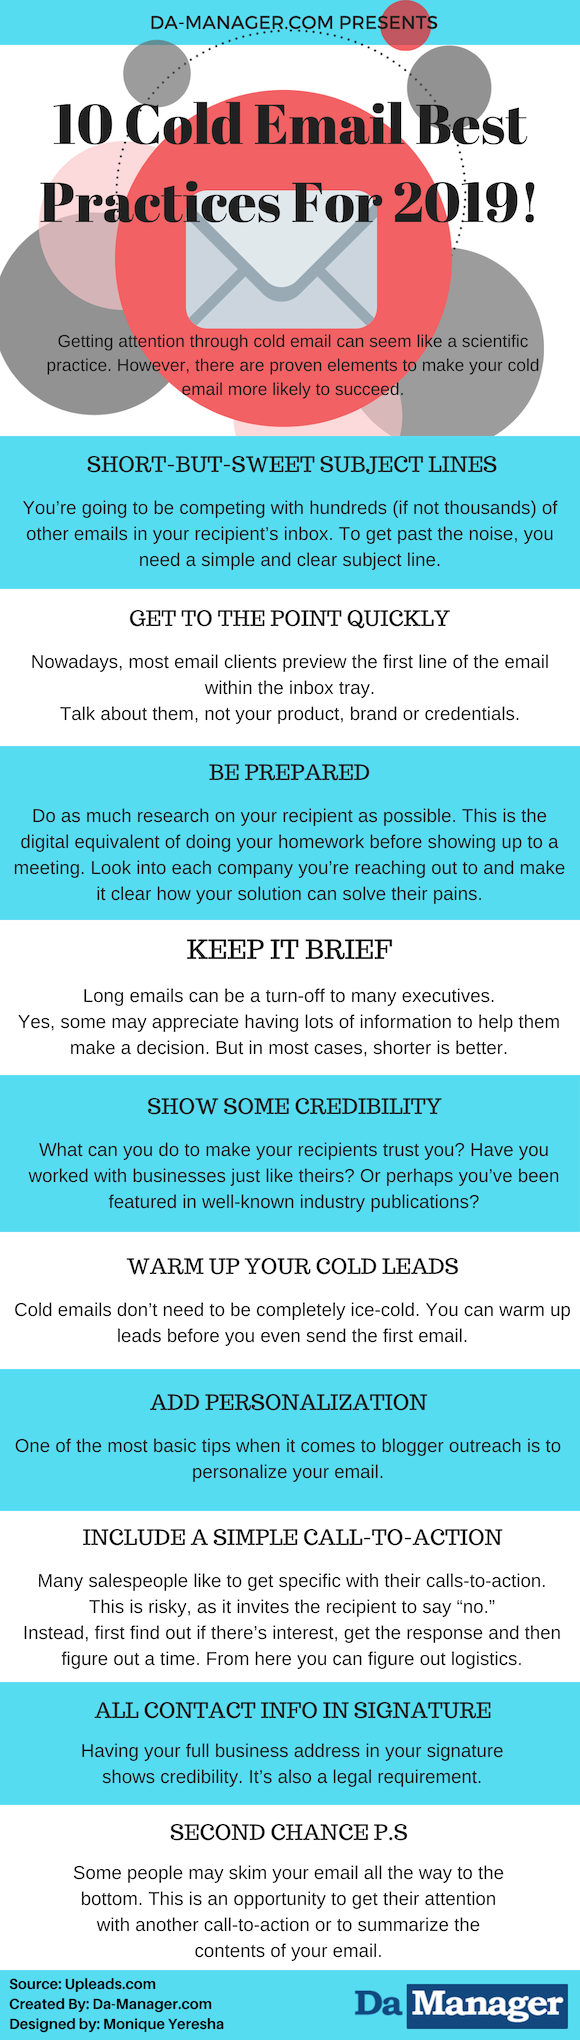 10 Cold Email Best Practices For Success